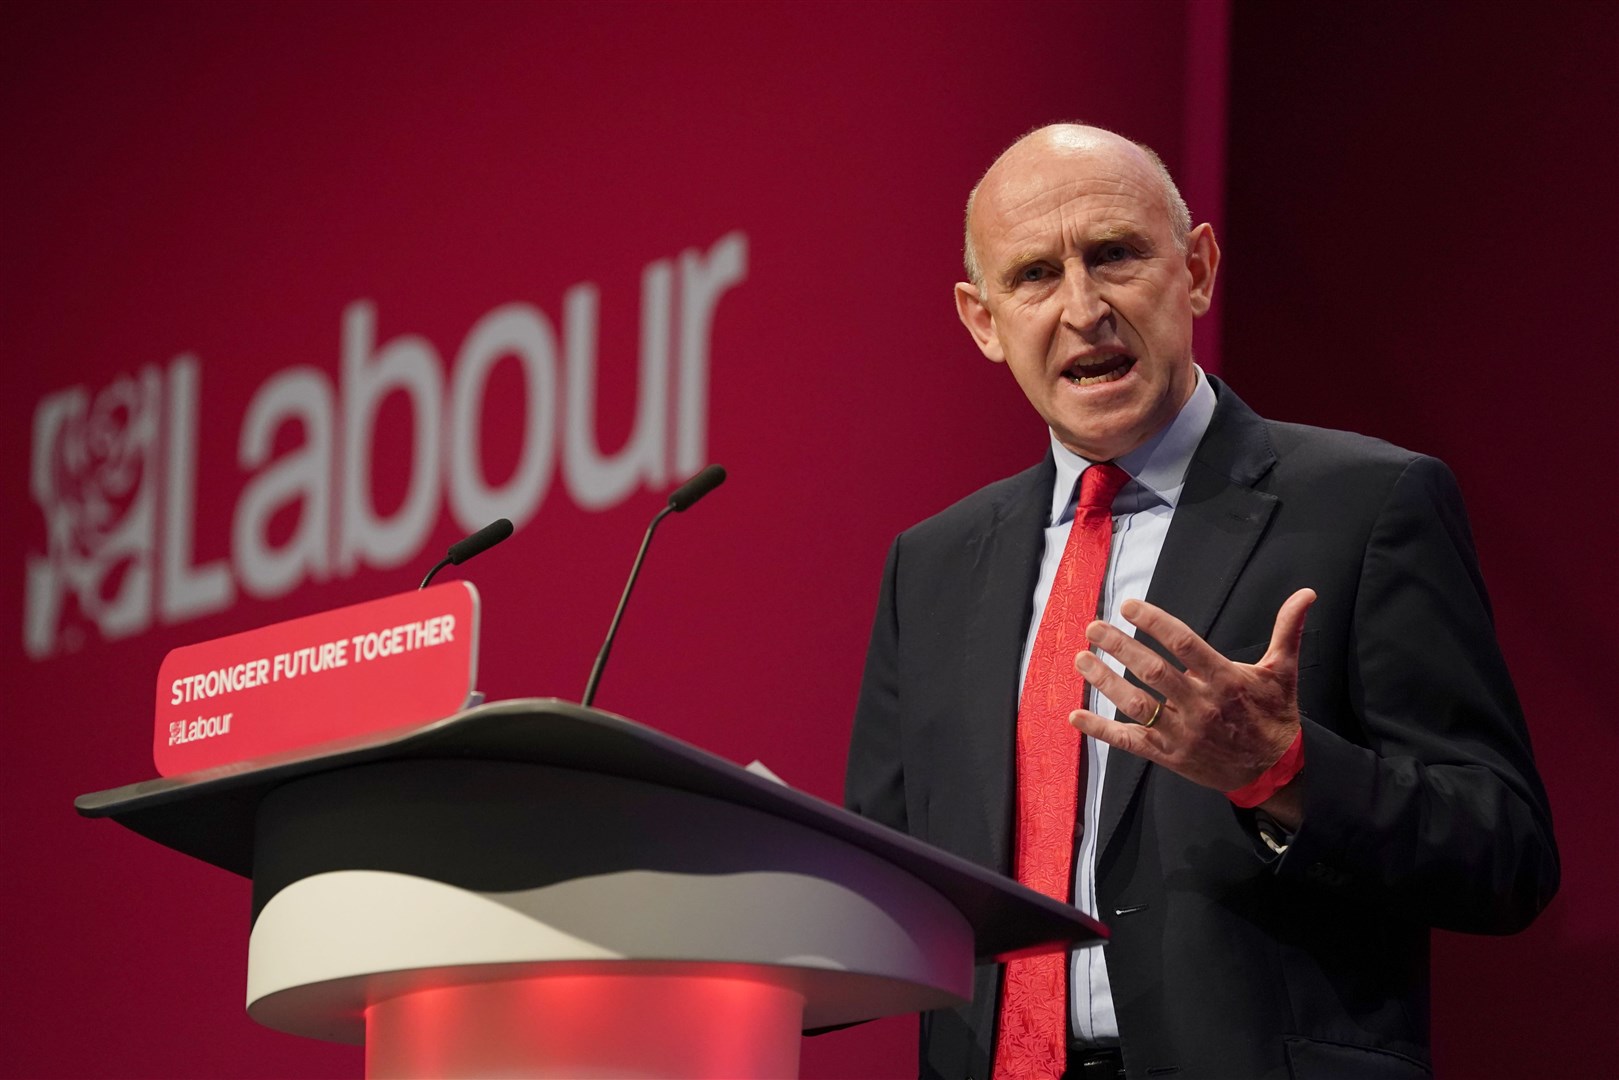 Shadow defence secretary John Healey said lessons need to be learned from the row (Gareth Fuller/PA)